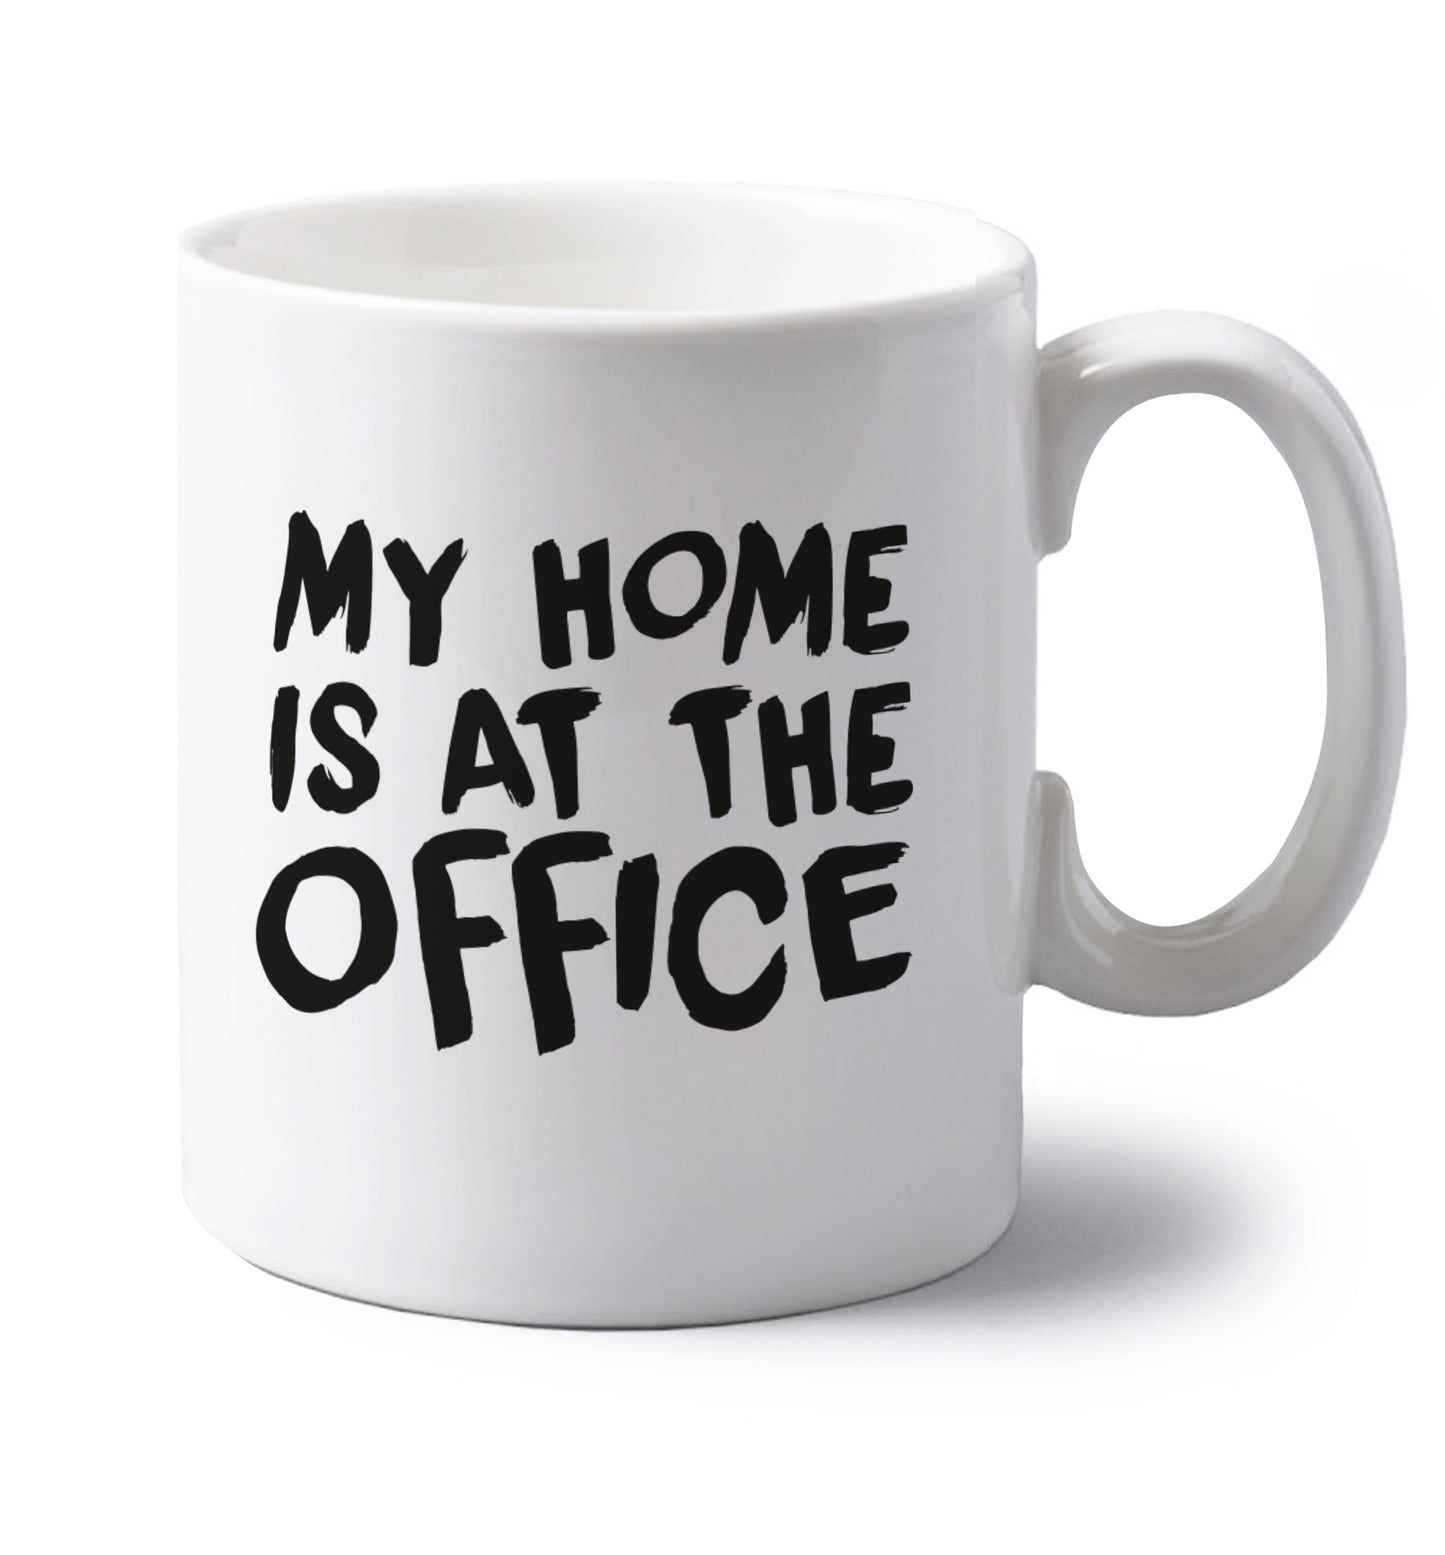 My home is at the office left handed white ceramic mug 